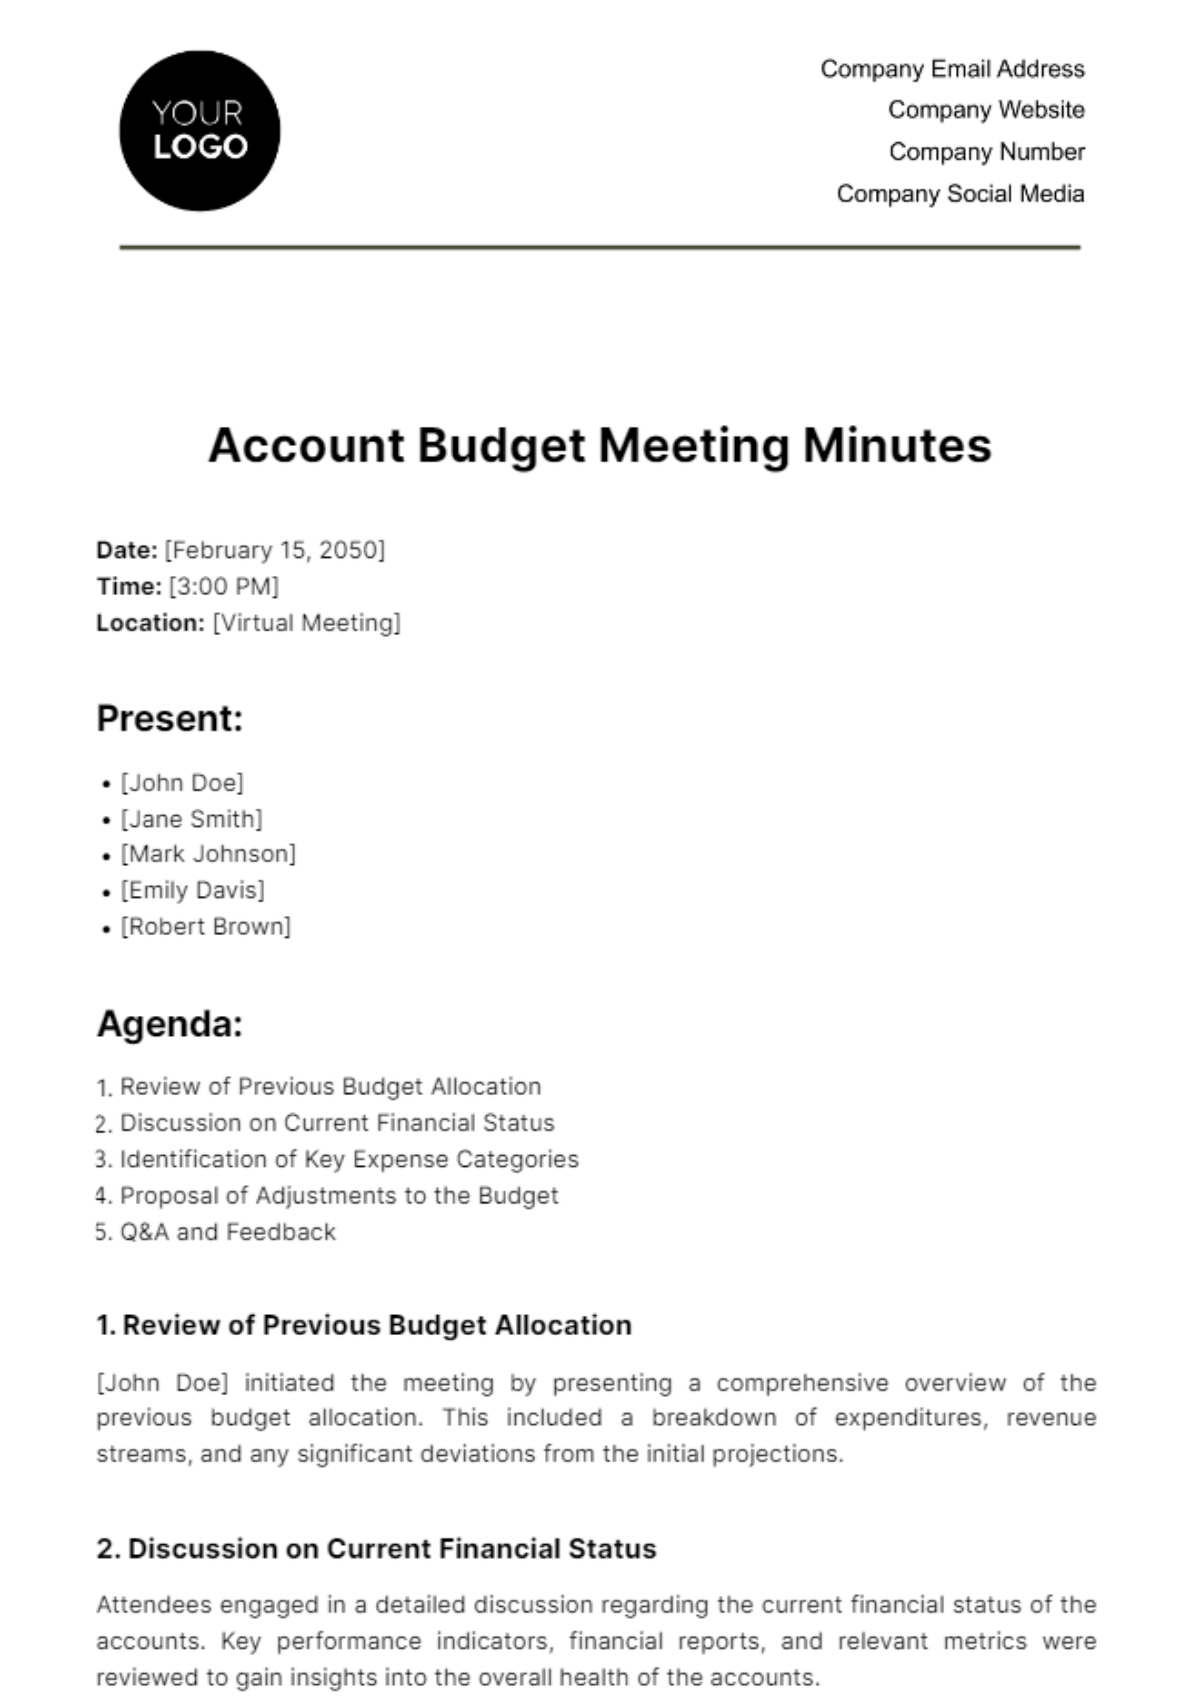 Account Budget Meeting Minute Template